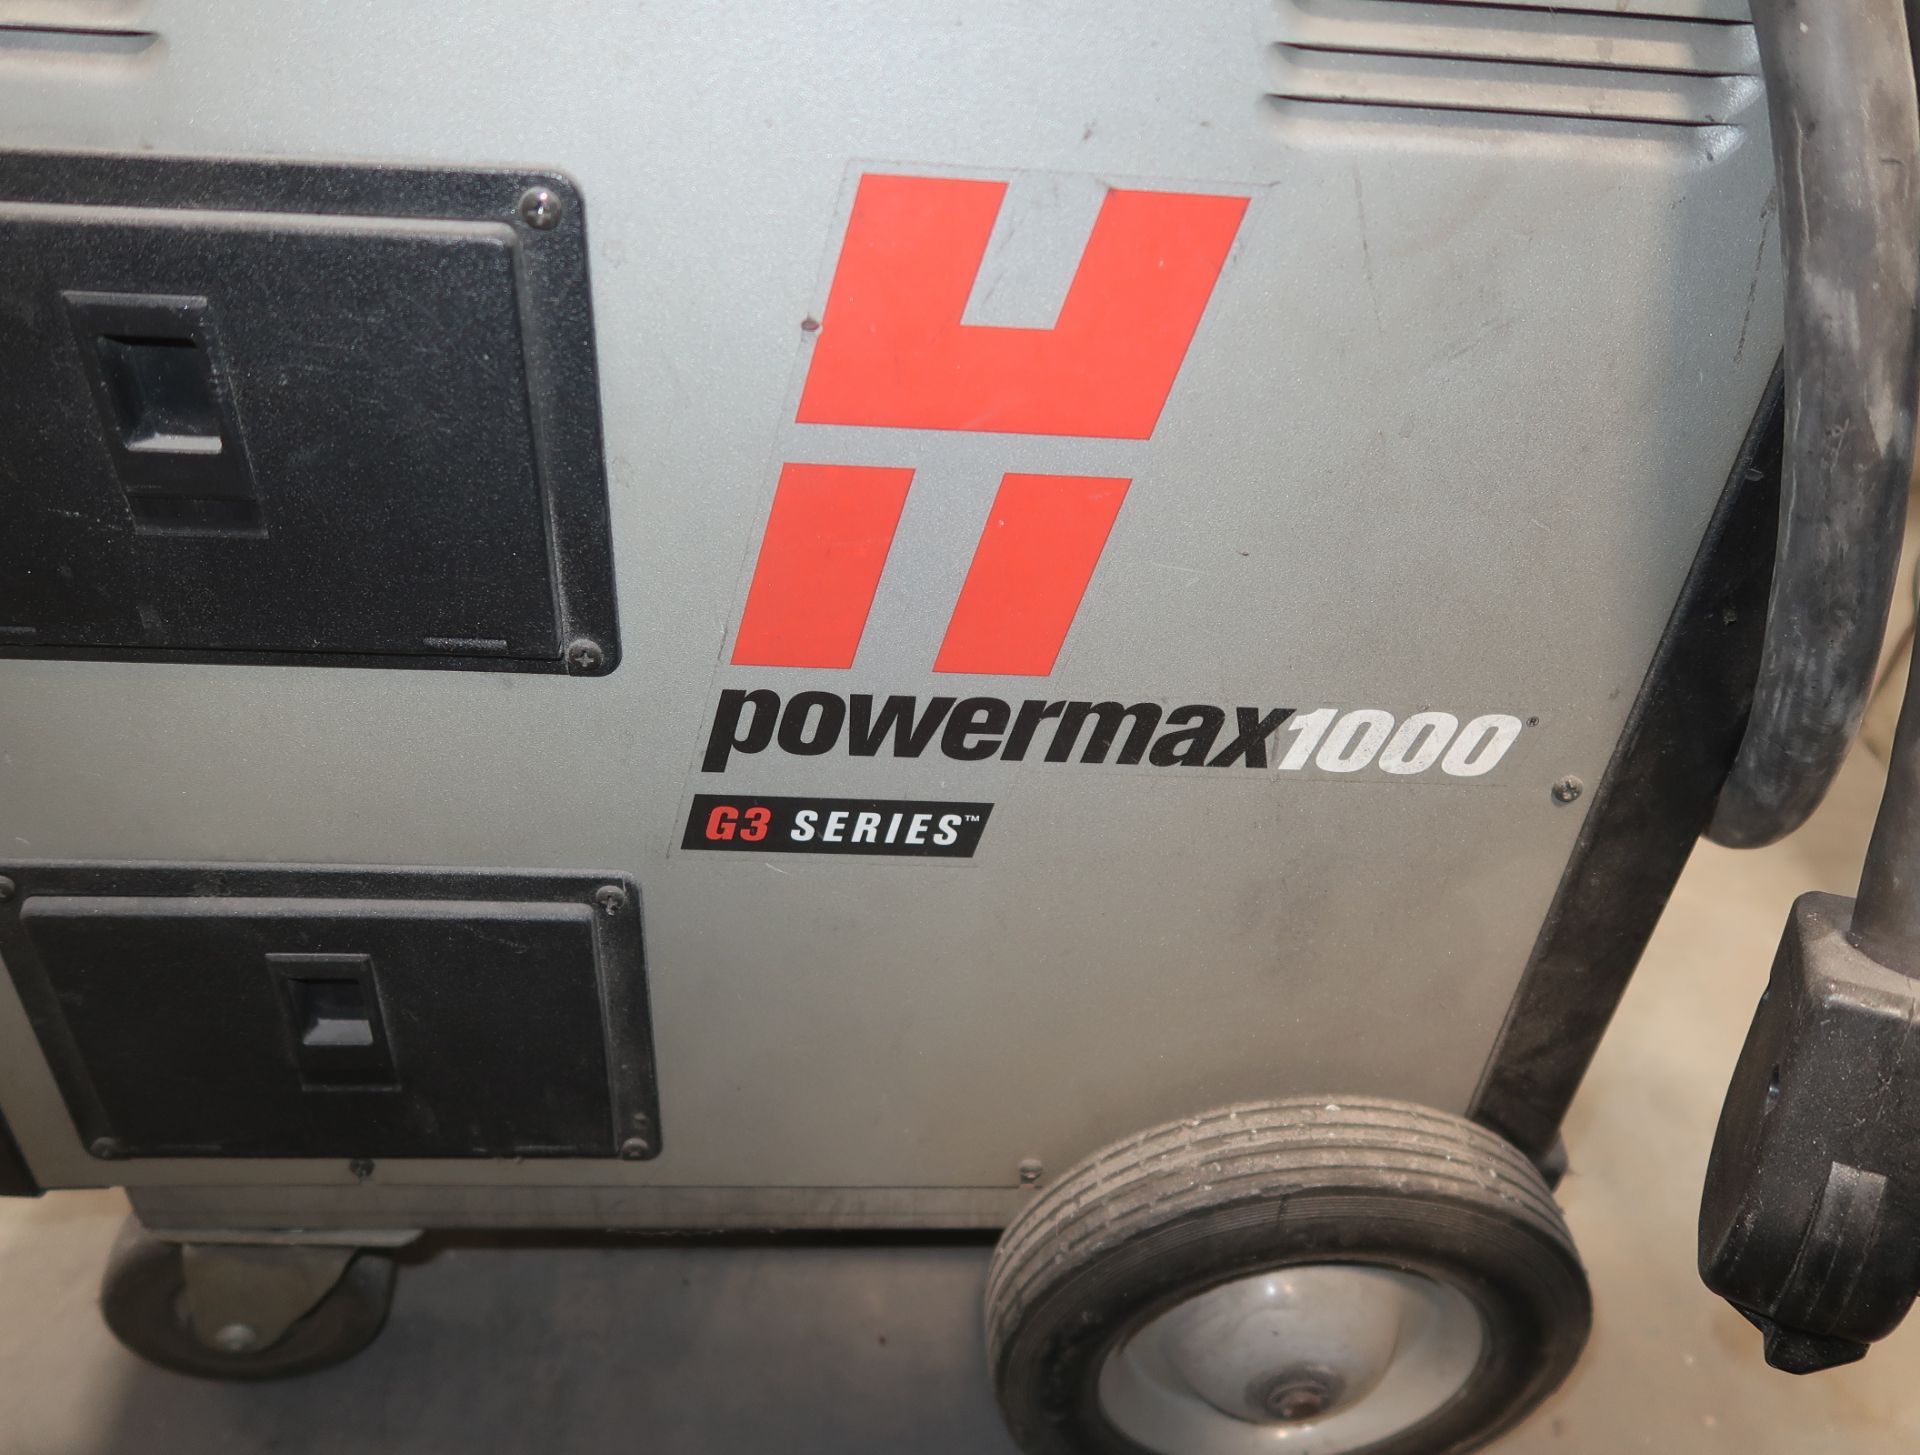 HYPERTHERM POWER MAX 1000 G3 SERIES PLASMA CUTTER SYSTEM SN. 1000-026870 - Image 2 of 3